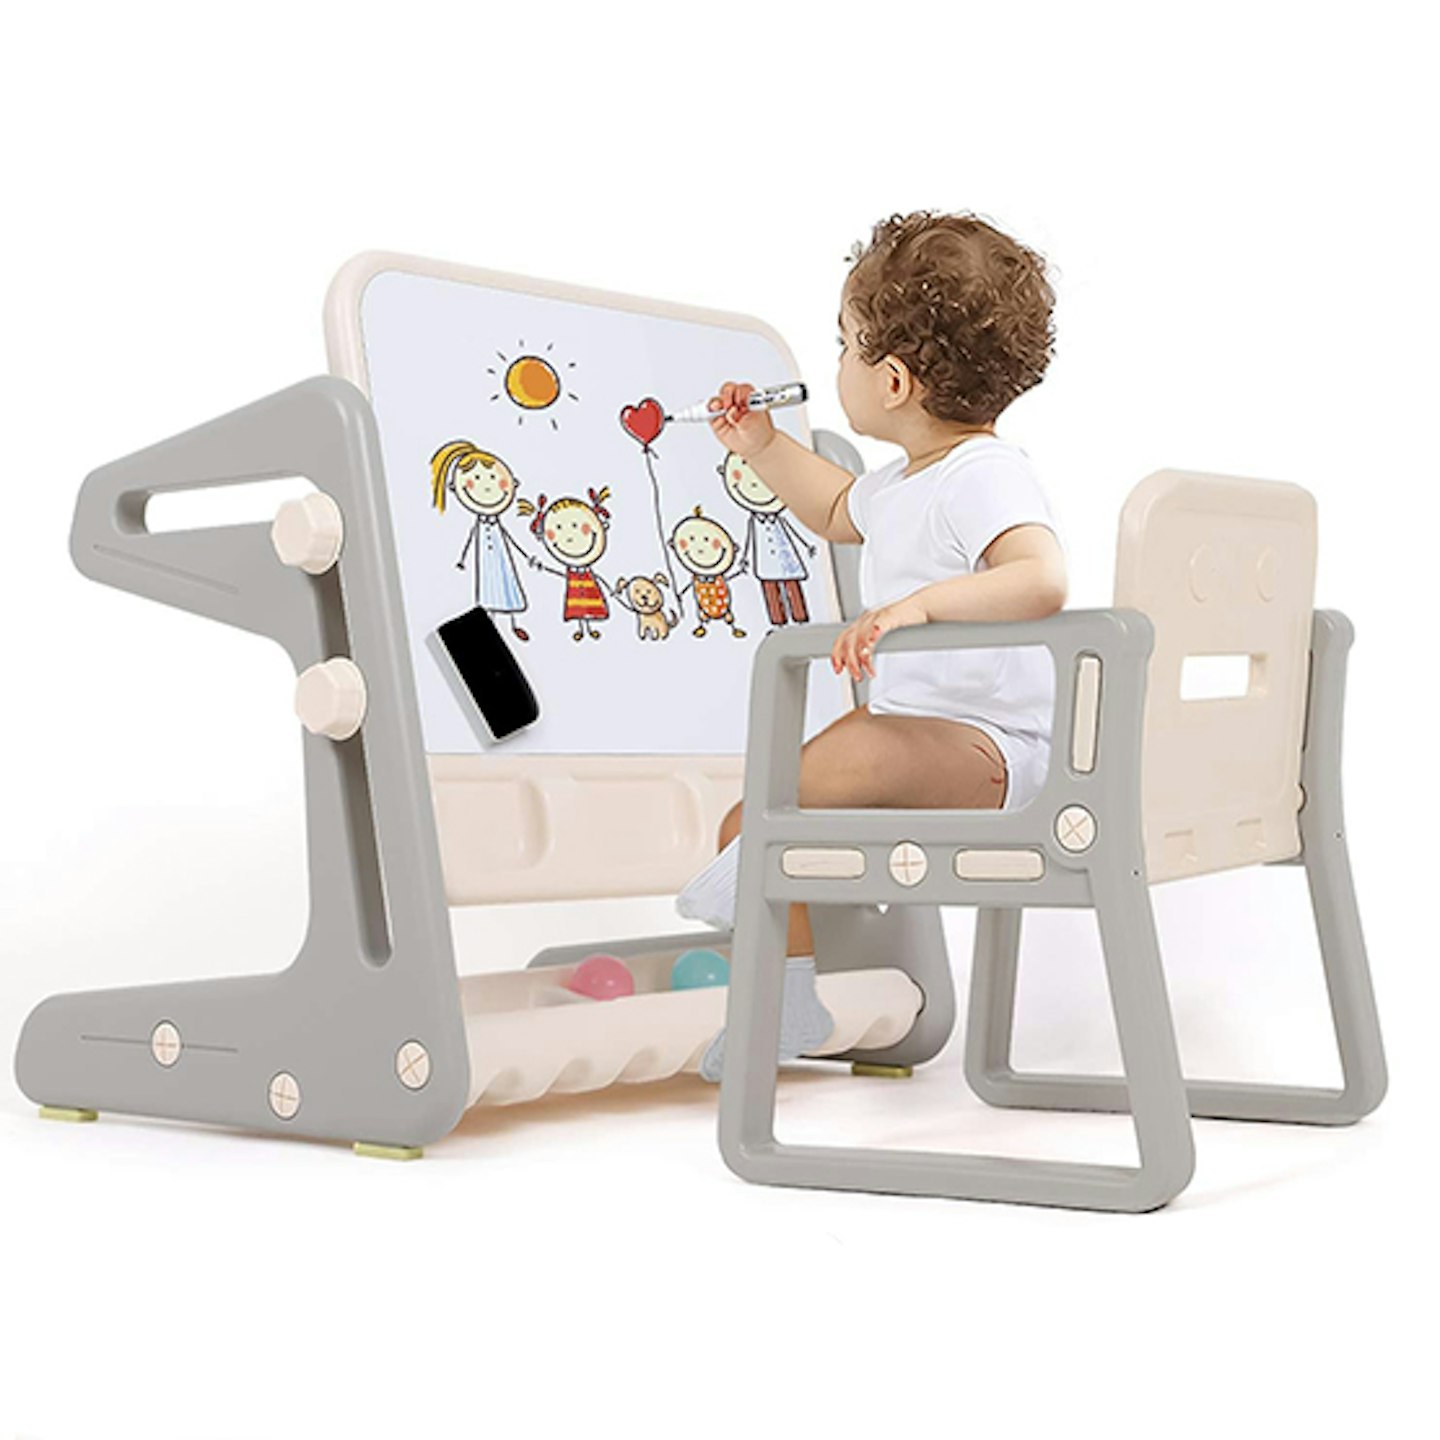 https://images.bauerhosting.com/affiliates/sites/12/2023/10/Hadwin-toddler-Table-and-Chairs.jpeg?auto=format&w=1440&q=80